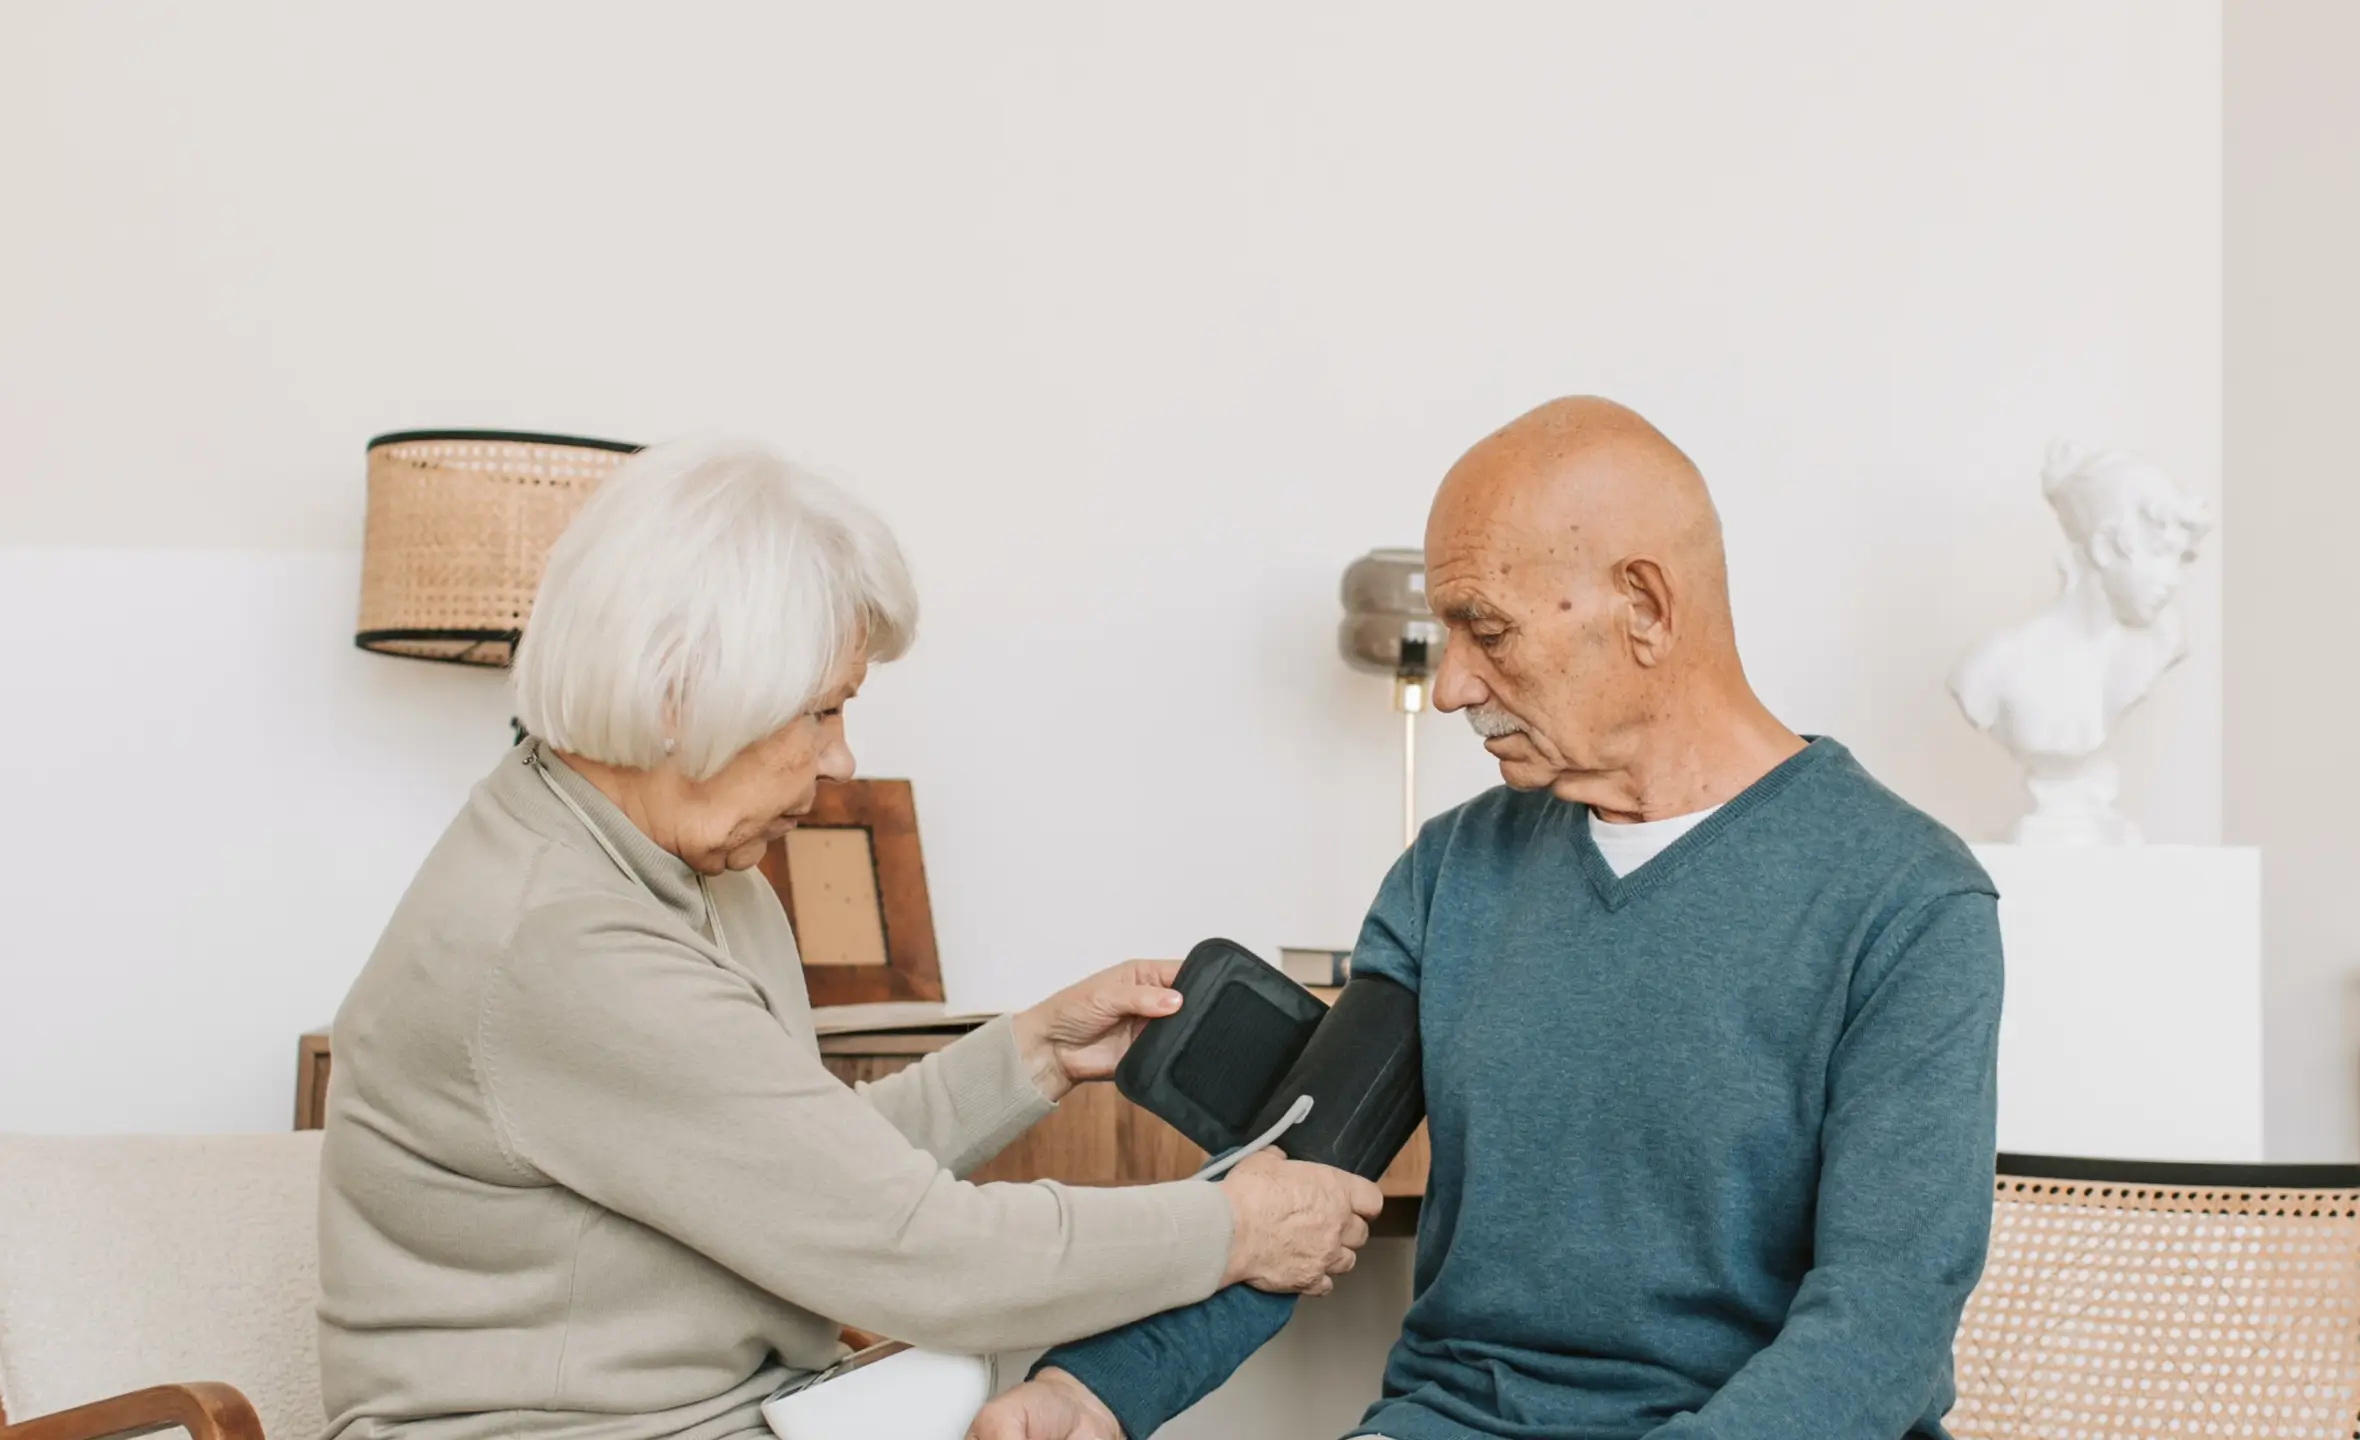 an image of an elderly woman checking the blood pressure of a man